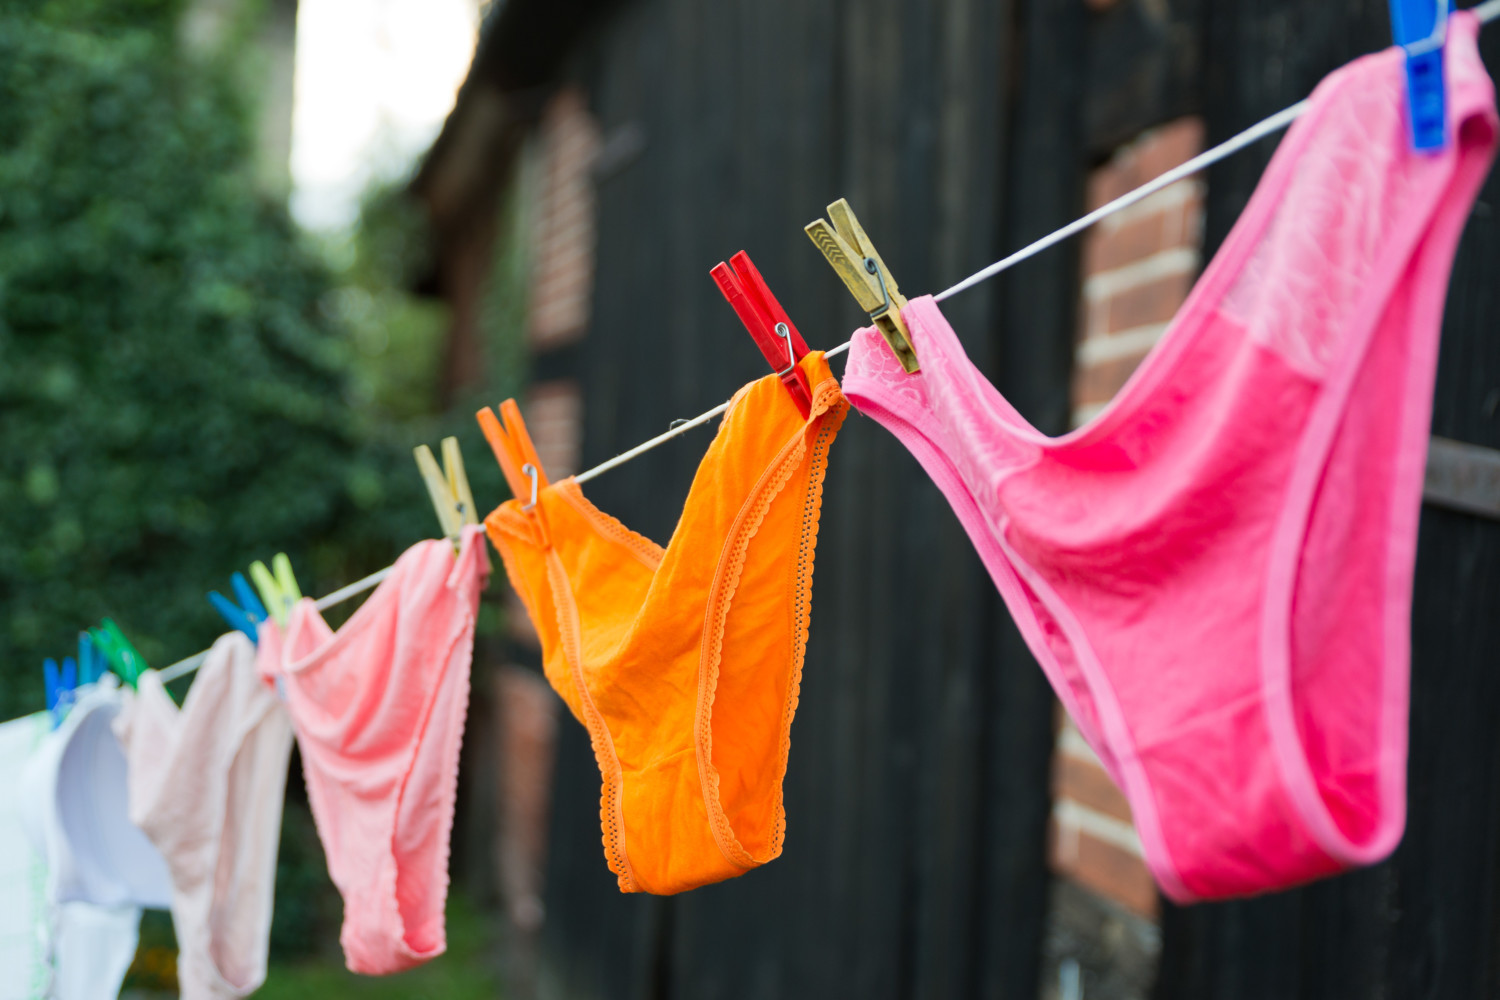 This survey found some surprising stats about Americans' underwear